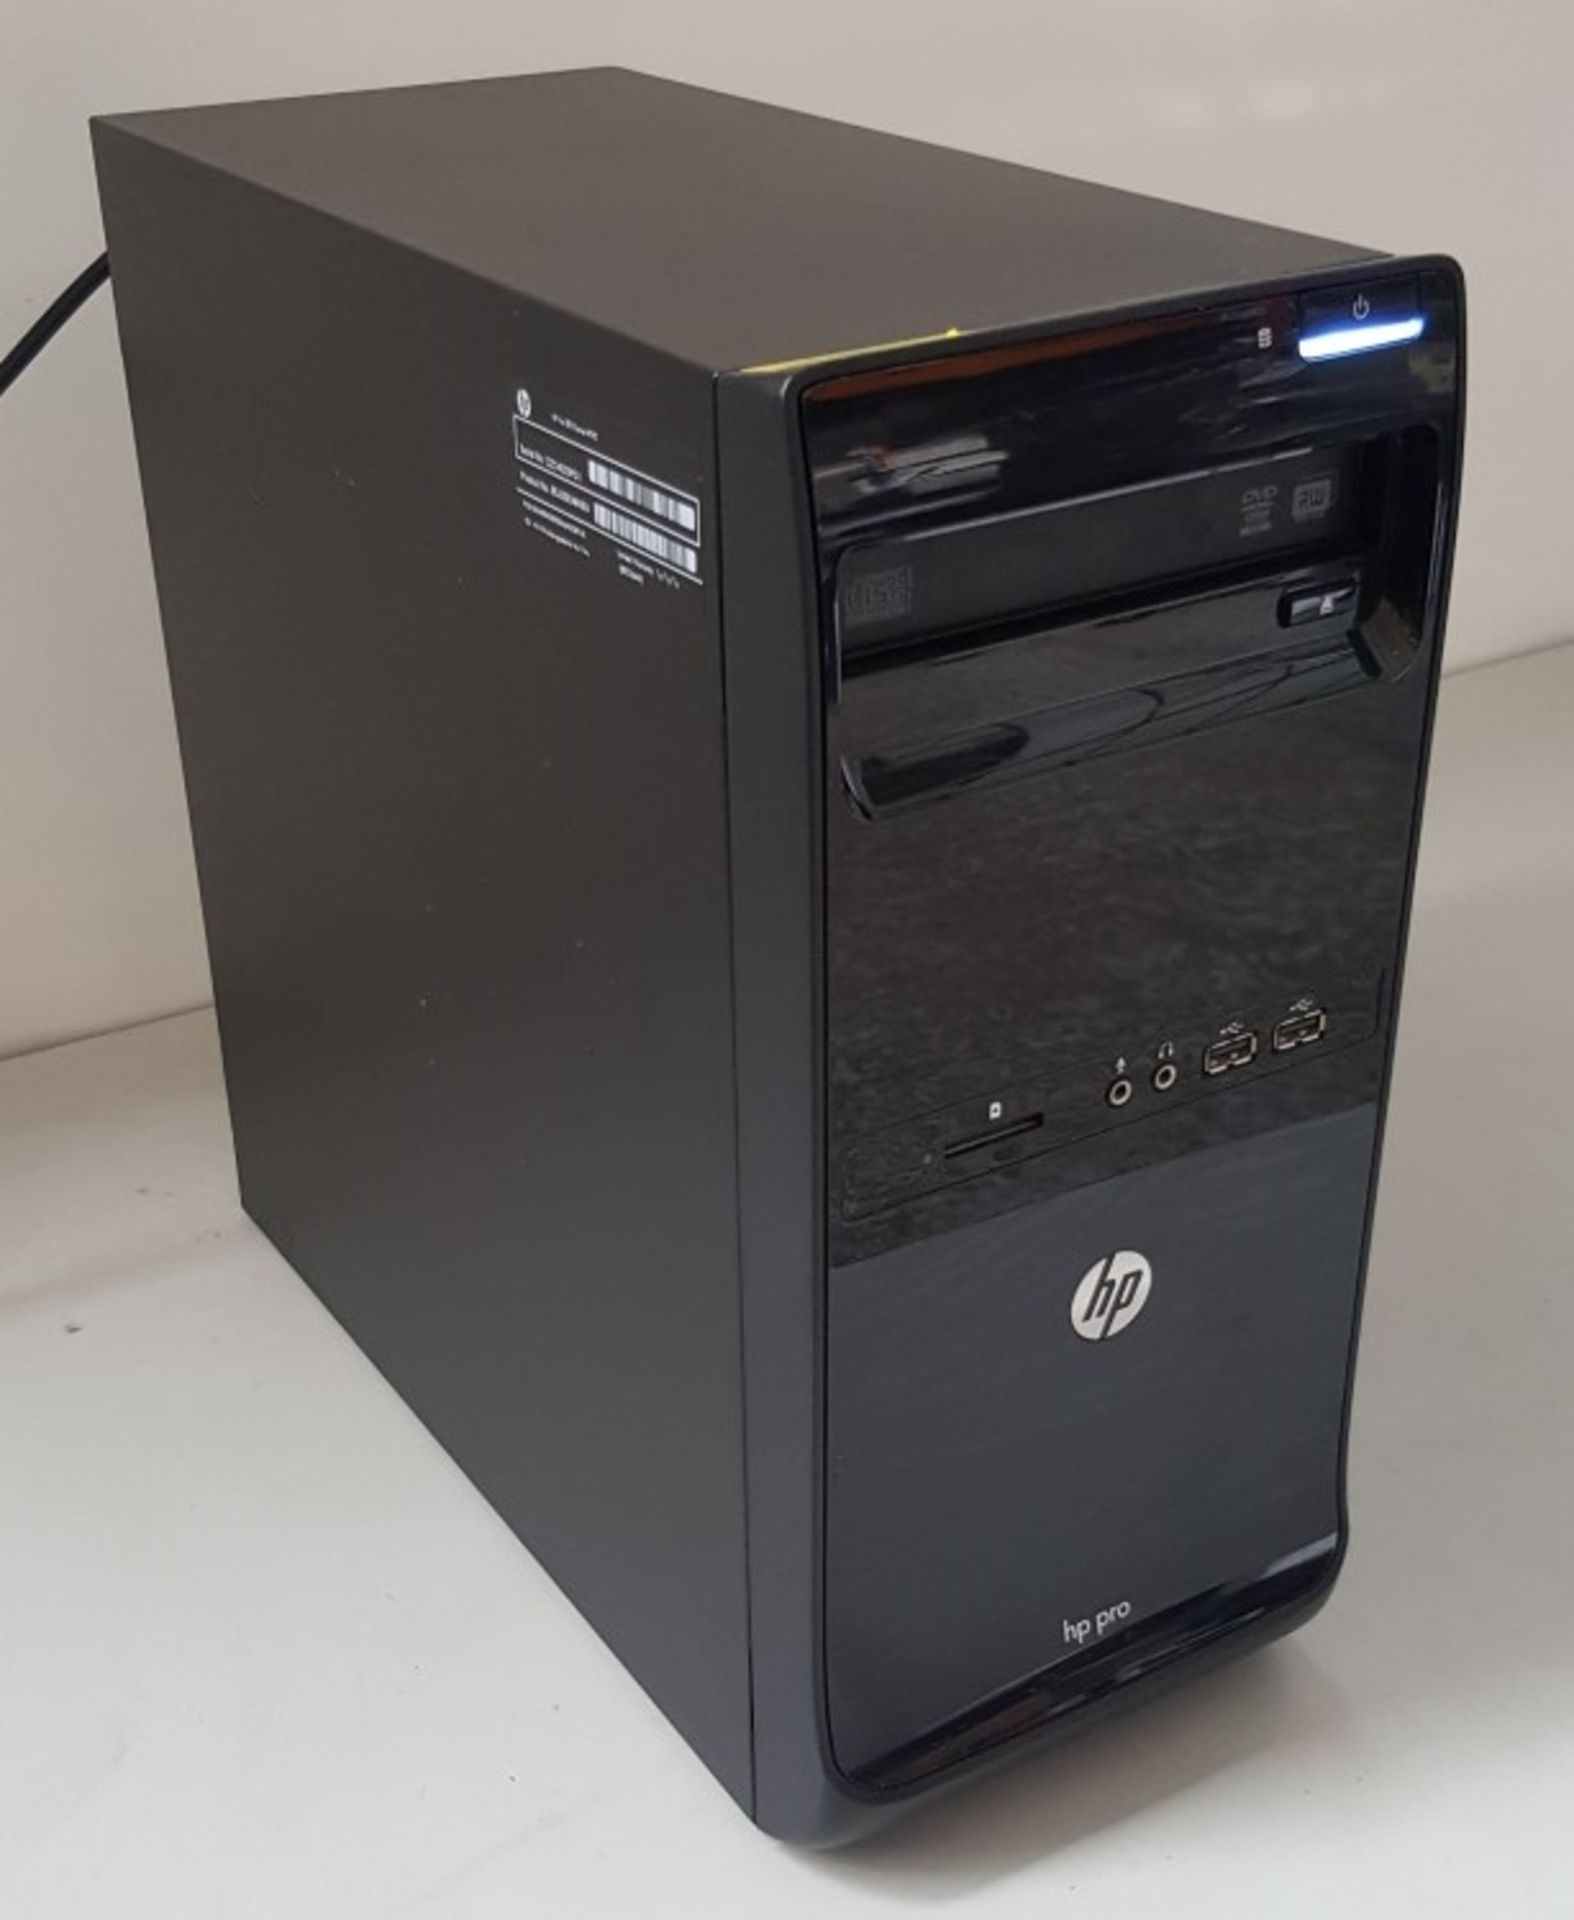 1 x HP Pro 3515 MT AMD A6-5400K 3.60GHz 4GB RAM Desktop PC - Ref BLT105 - Image 2 of 5